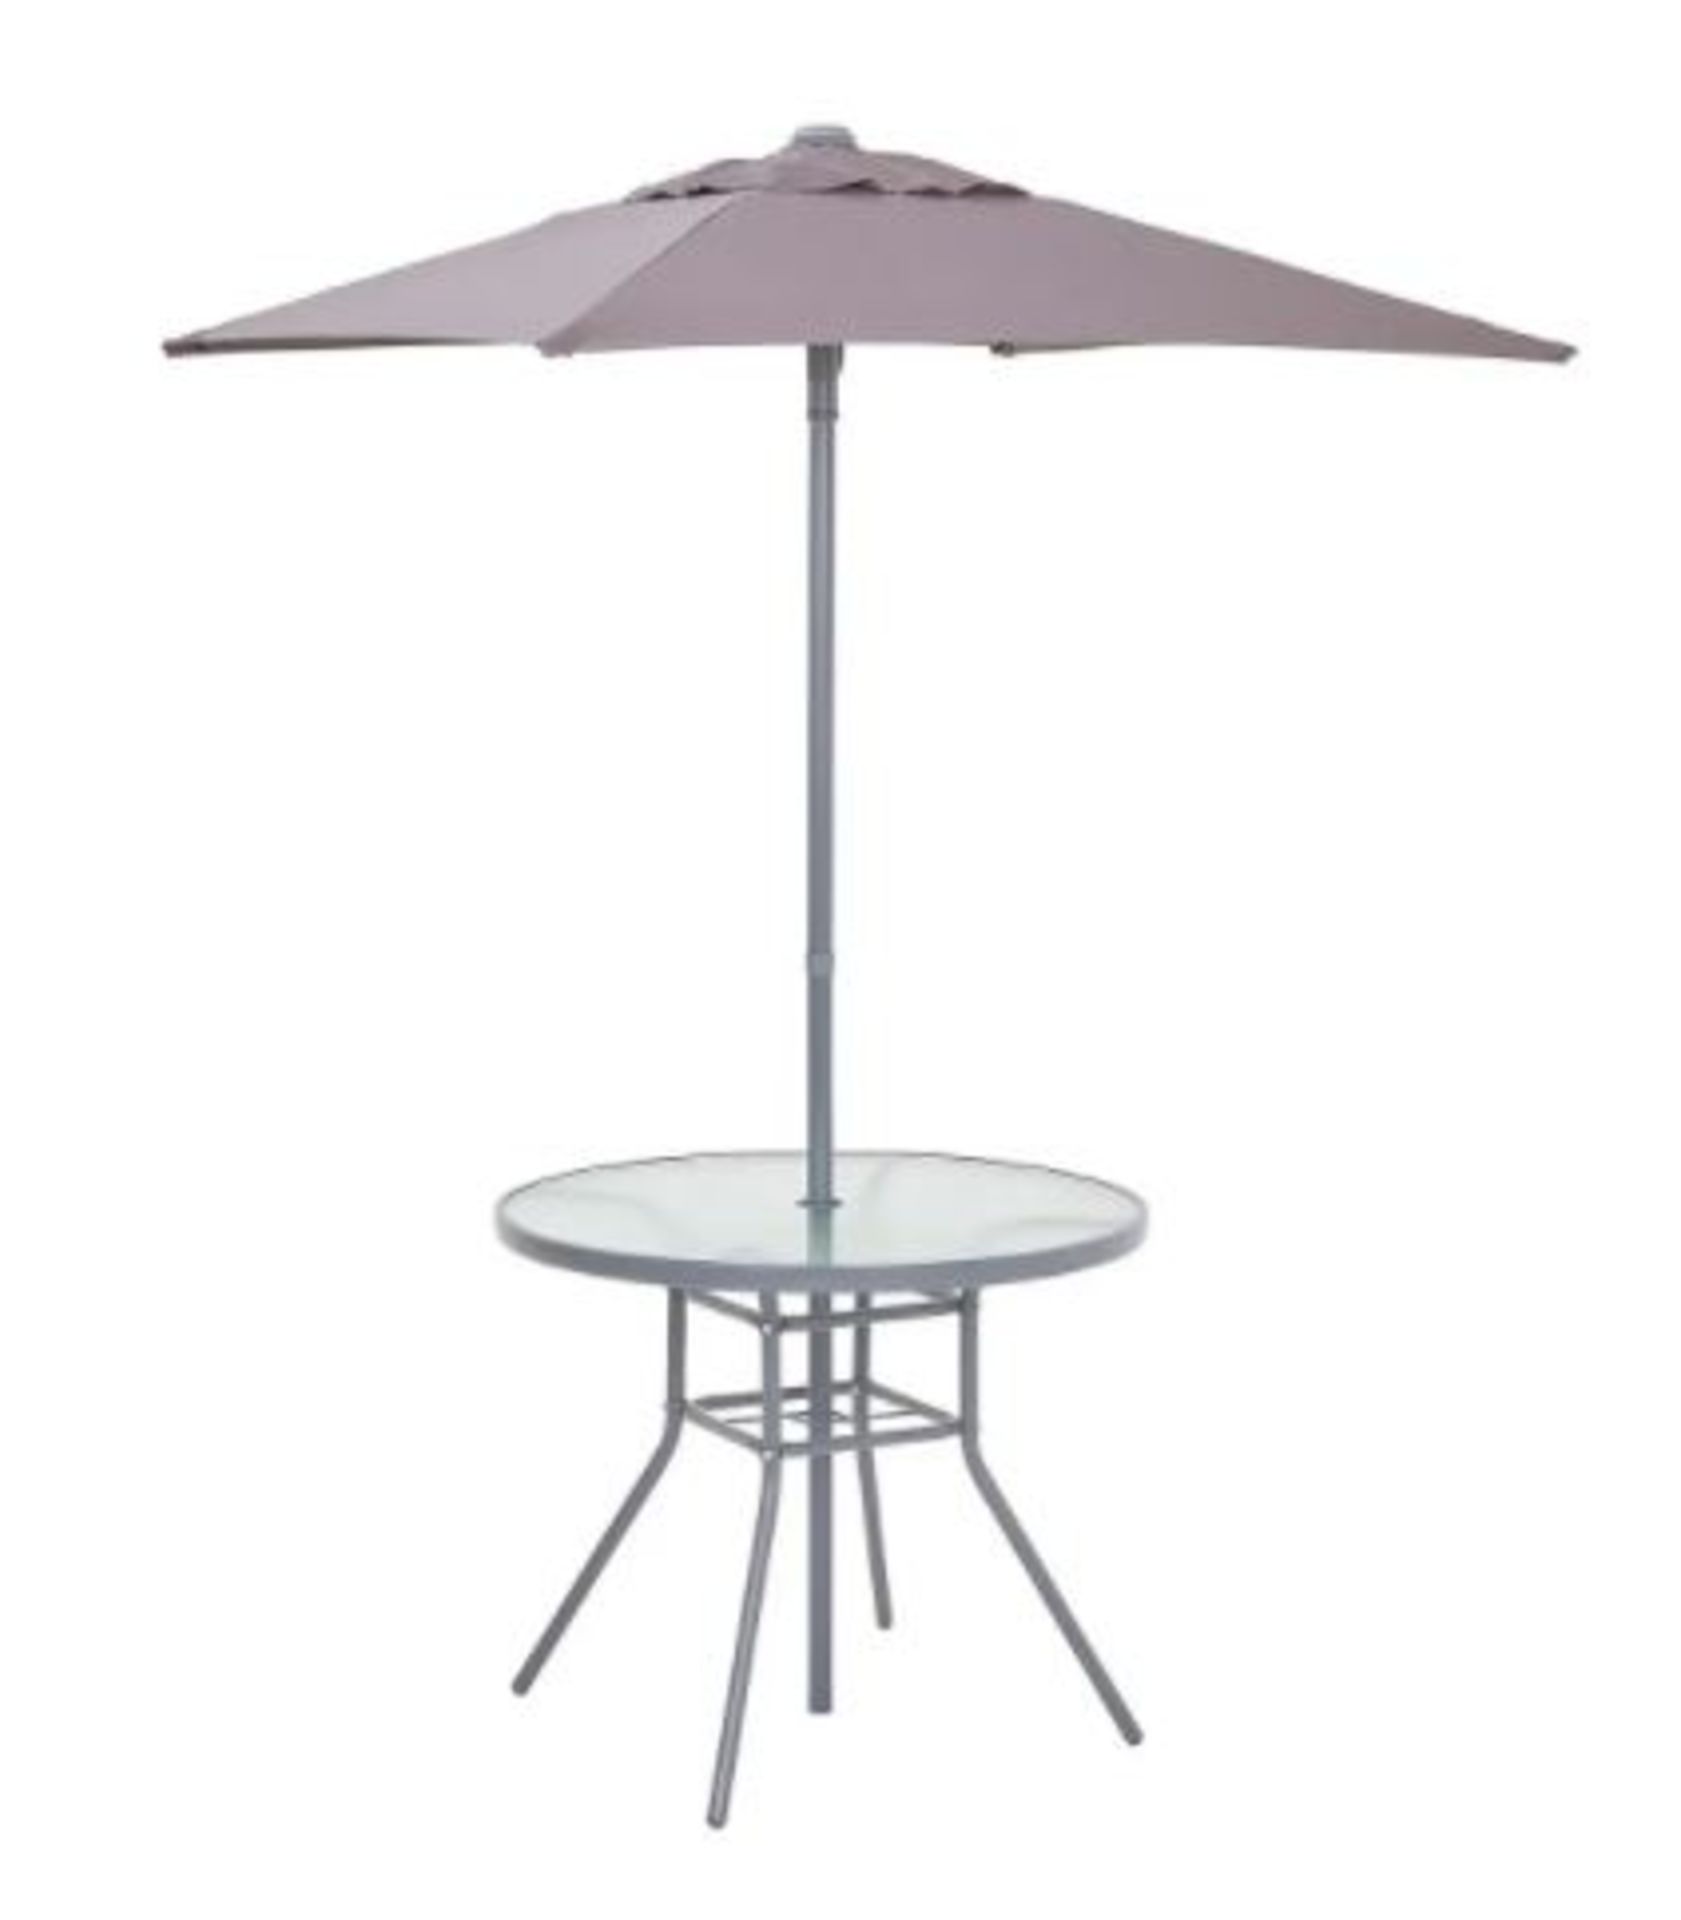 (R9F) 1x Andorra Round Table & Parasol. Powder Coated Steel Frame. Toughened Glass Top. Table: (H71